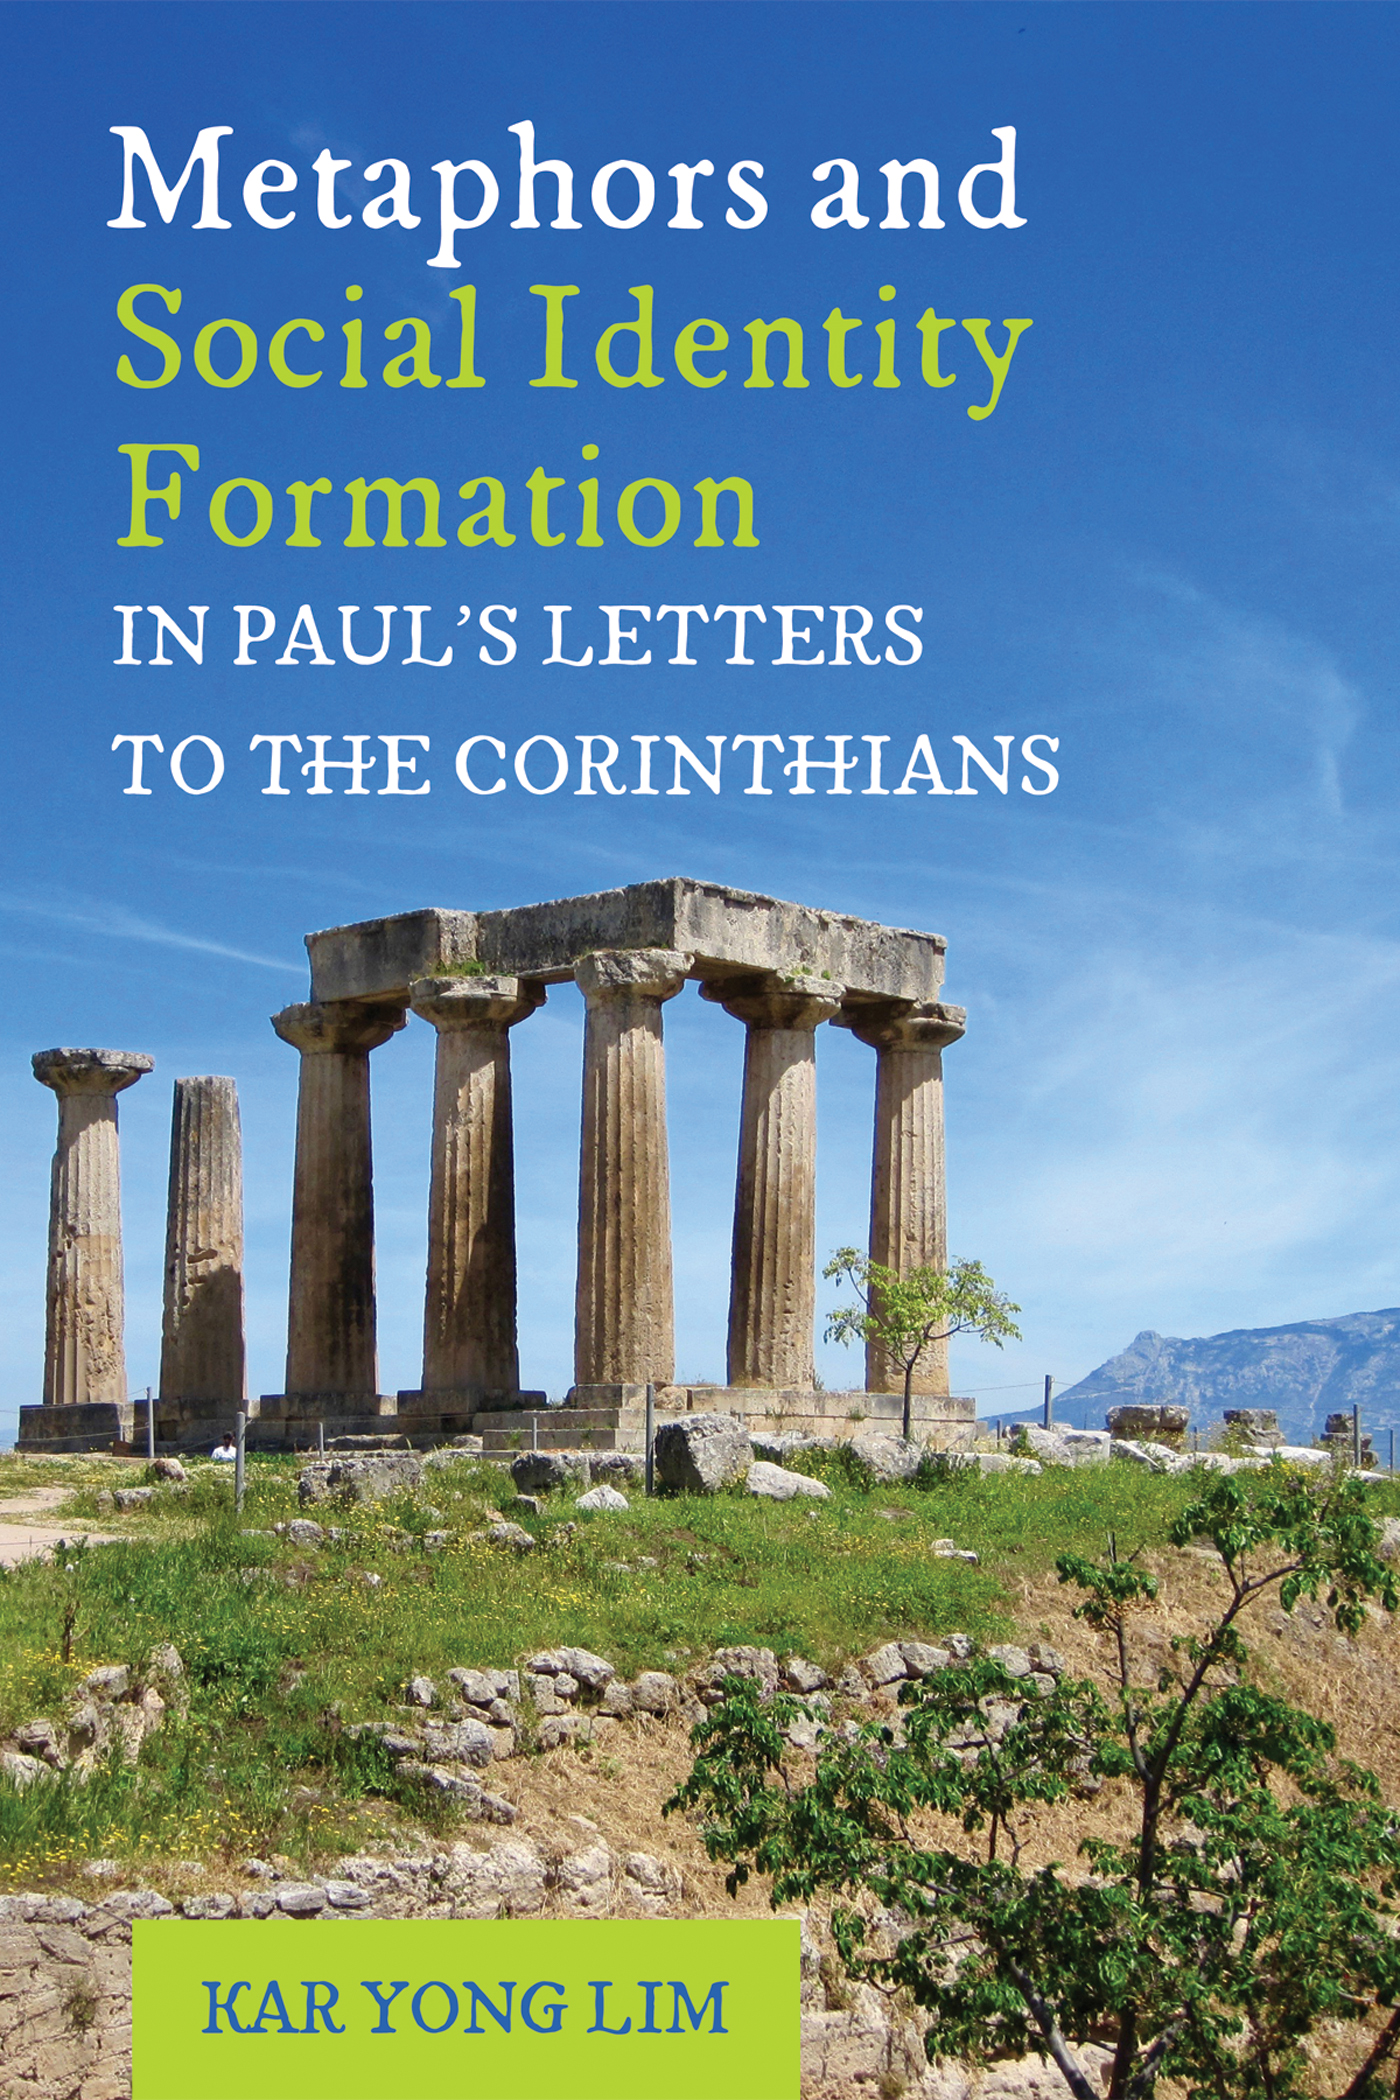 Metaphors and Social Identity Formation in Paul's Letters to the Corinthians